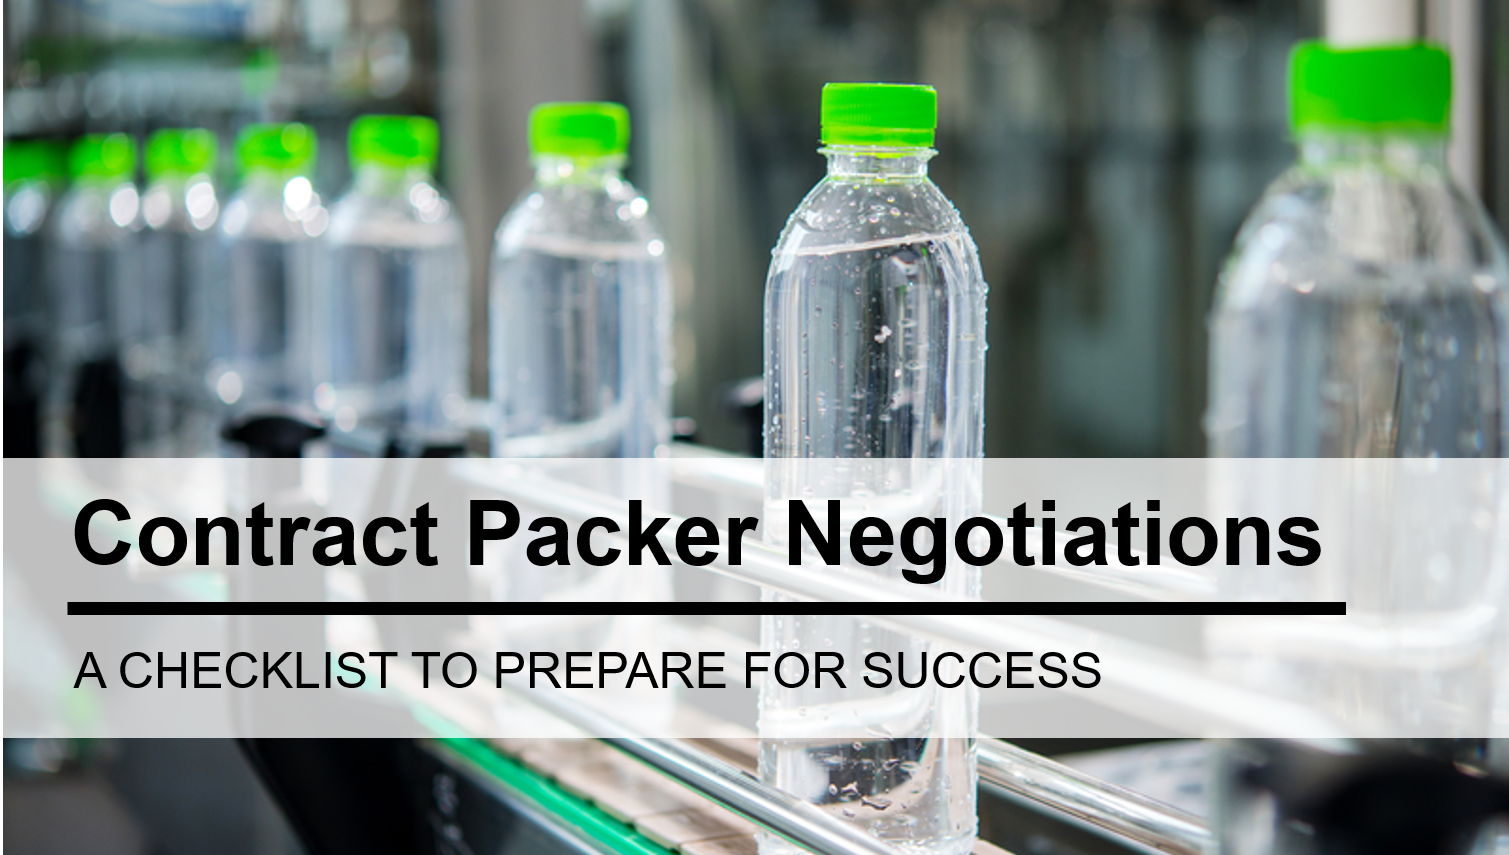 Contract Packer Negotiations